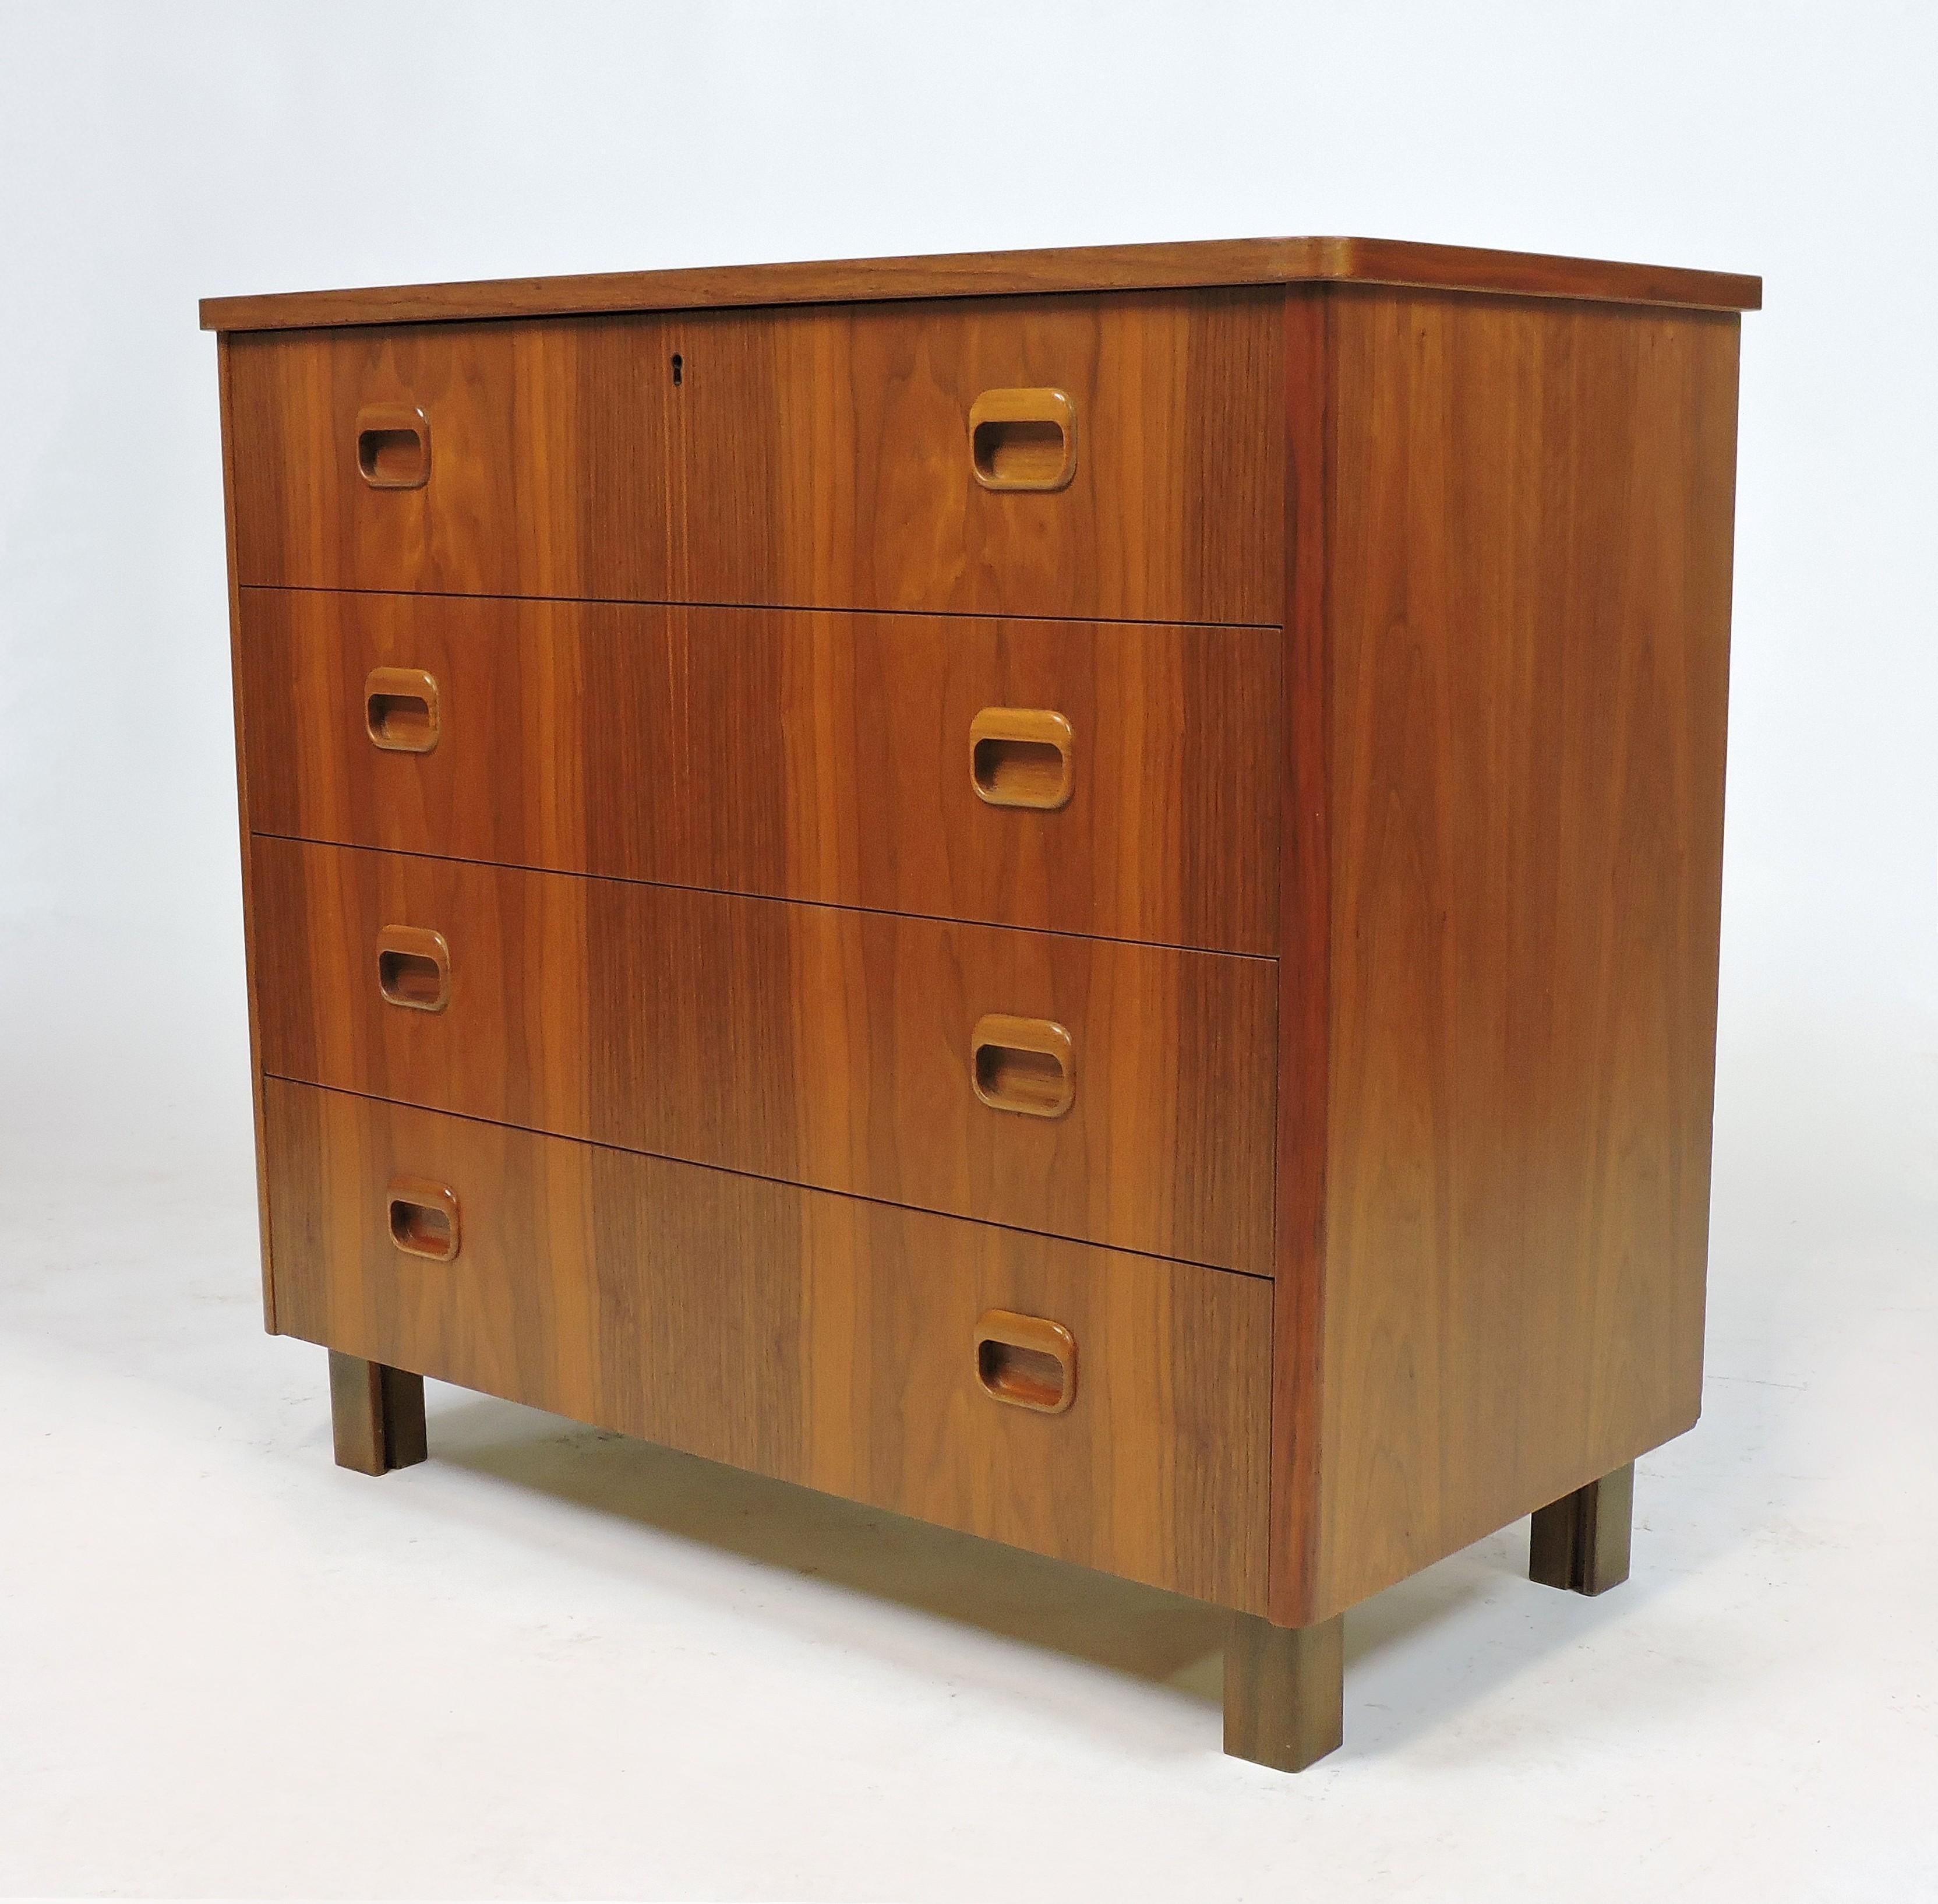 Beautiful teak dresser made in Sweden by Sveriges Mobel IndustI Forbund (Swedish Furniture Makers Association). This cabinet has four drawers with sculpted recessed pulls and a striking wood grain.

   